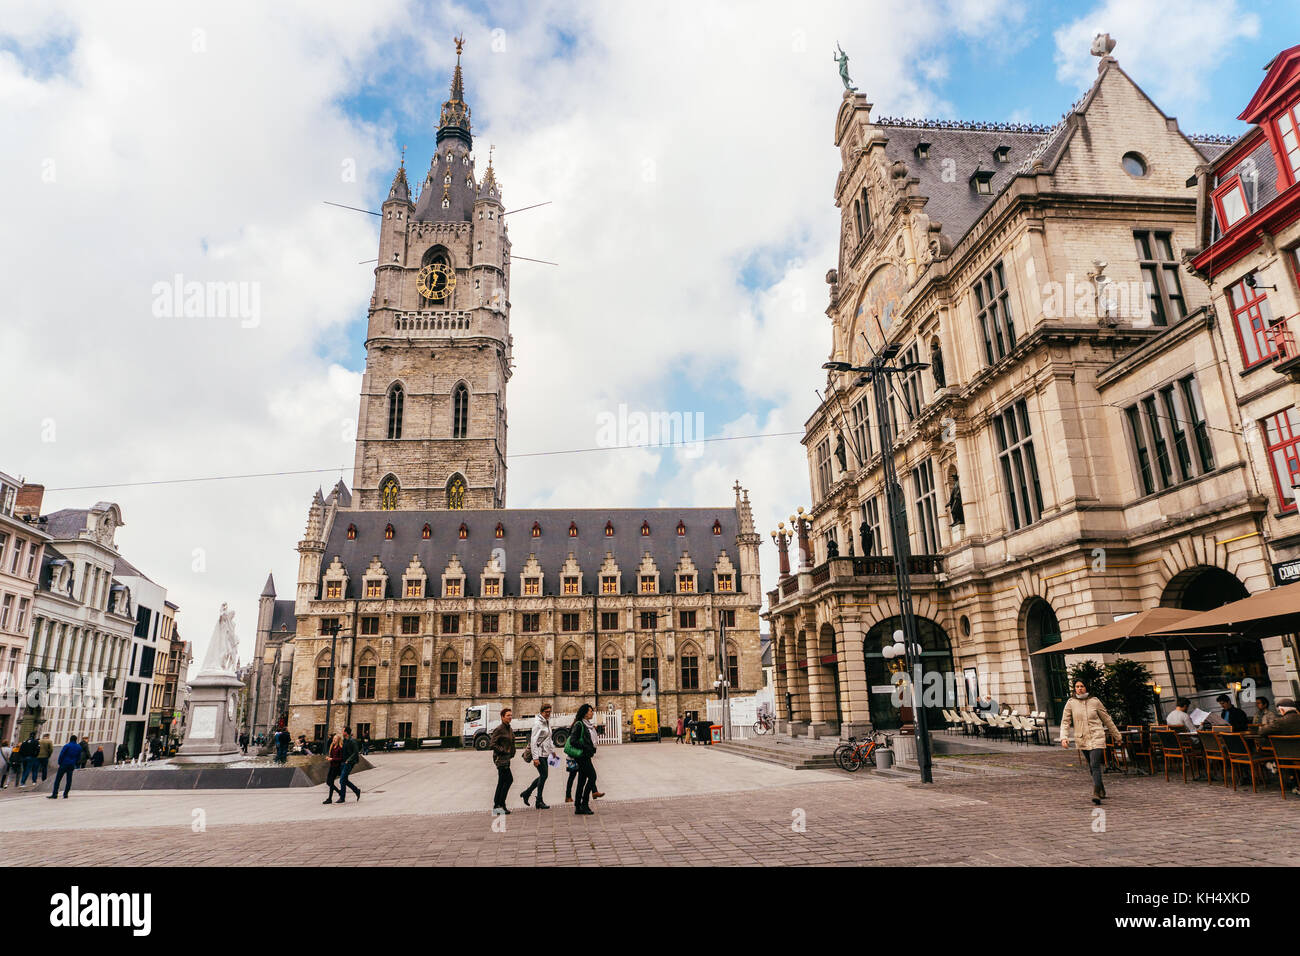 GHENT, BELGIUM - November, 2017: Architecture of Ghent city center. Ghent is a city and a municipality located in the Flemish region of Belgium, capit Stock Photo